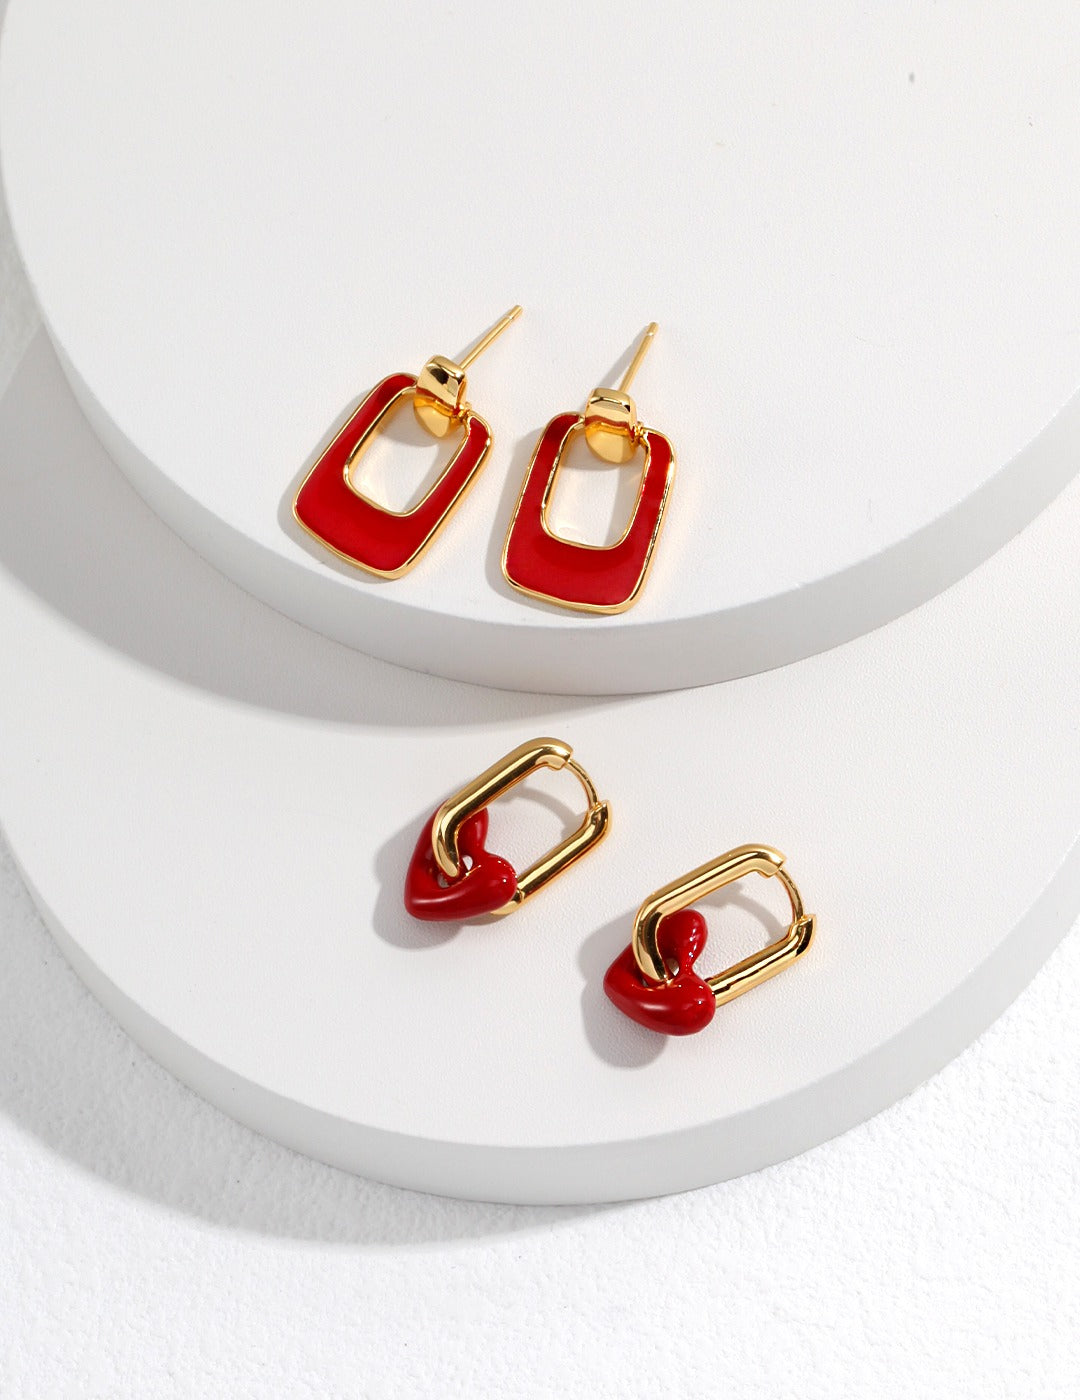 collection of minimalist gold earrings with a bold red color drip glaze